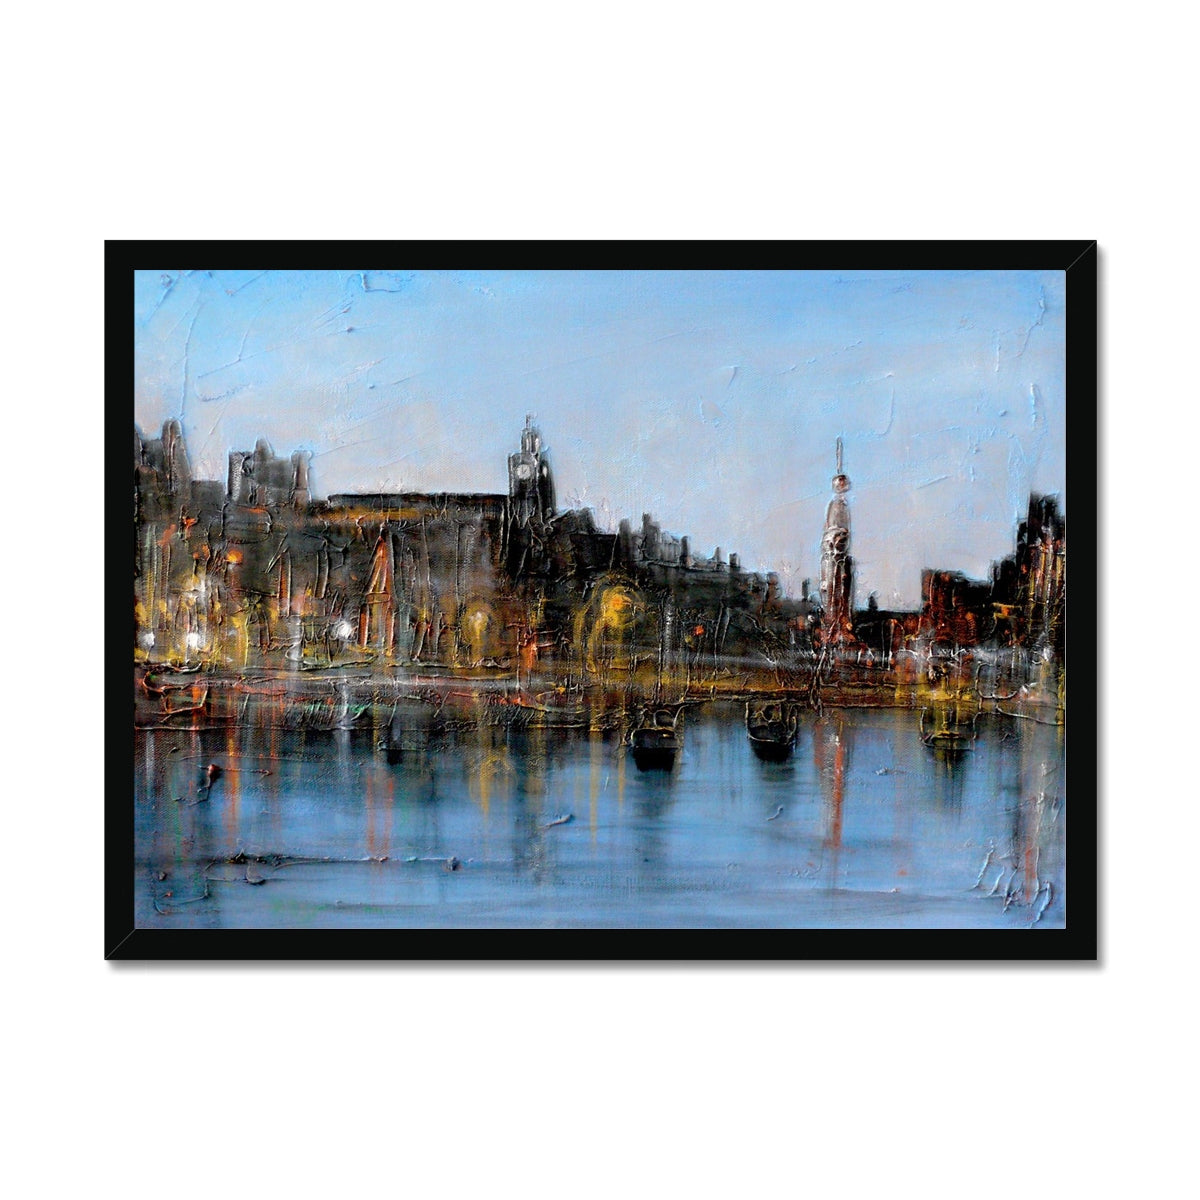 Winter In Amsterdam Painting | Framed Prints From Scotland-Framed Prints-World Art Gallery-A2 Landscape-Black Frame-Paintings, Prints, Homeware, Art Gifts From Scotland By Scottish Artist Kevin Hunter